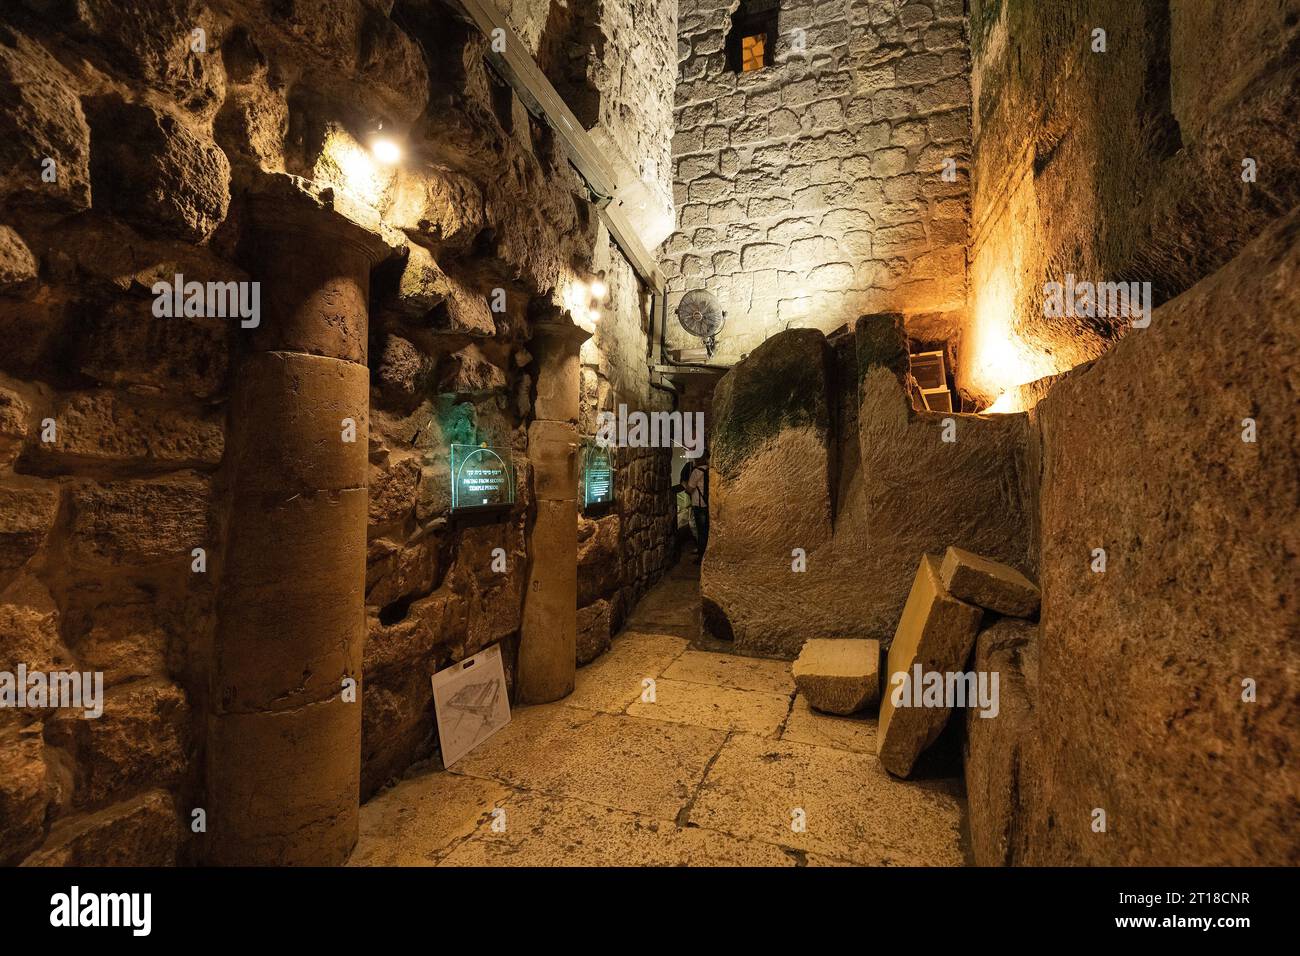 Jerusalem, Israel - October 13, 2017: Western Wall underground Tunnel with Second Temple period street along Temple Mount walls in Jerusalem Old City Stock Photo